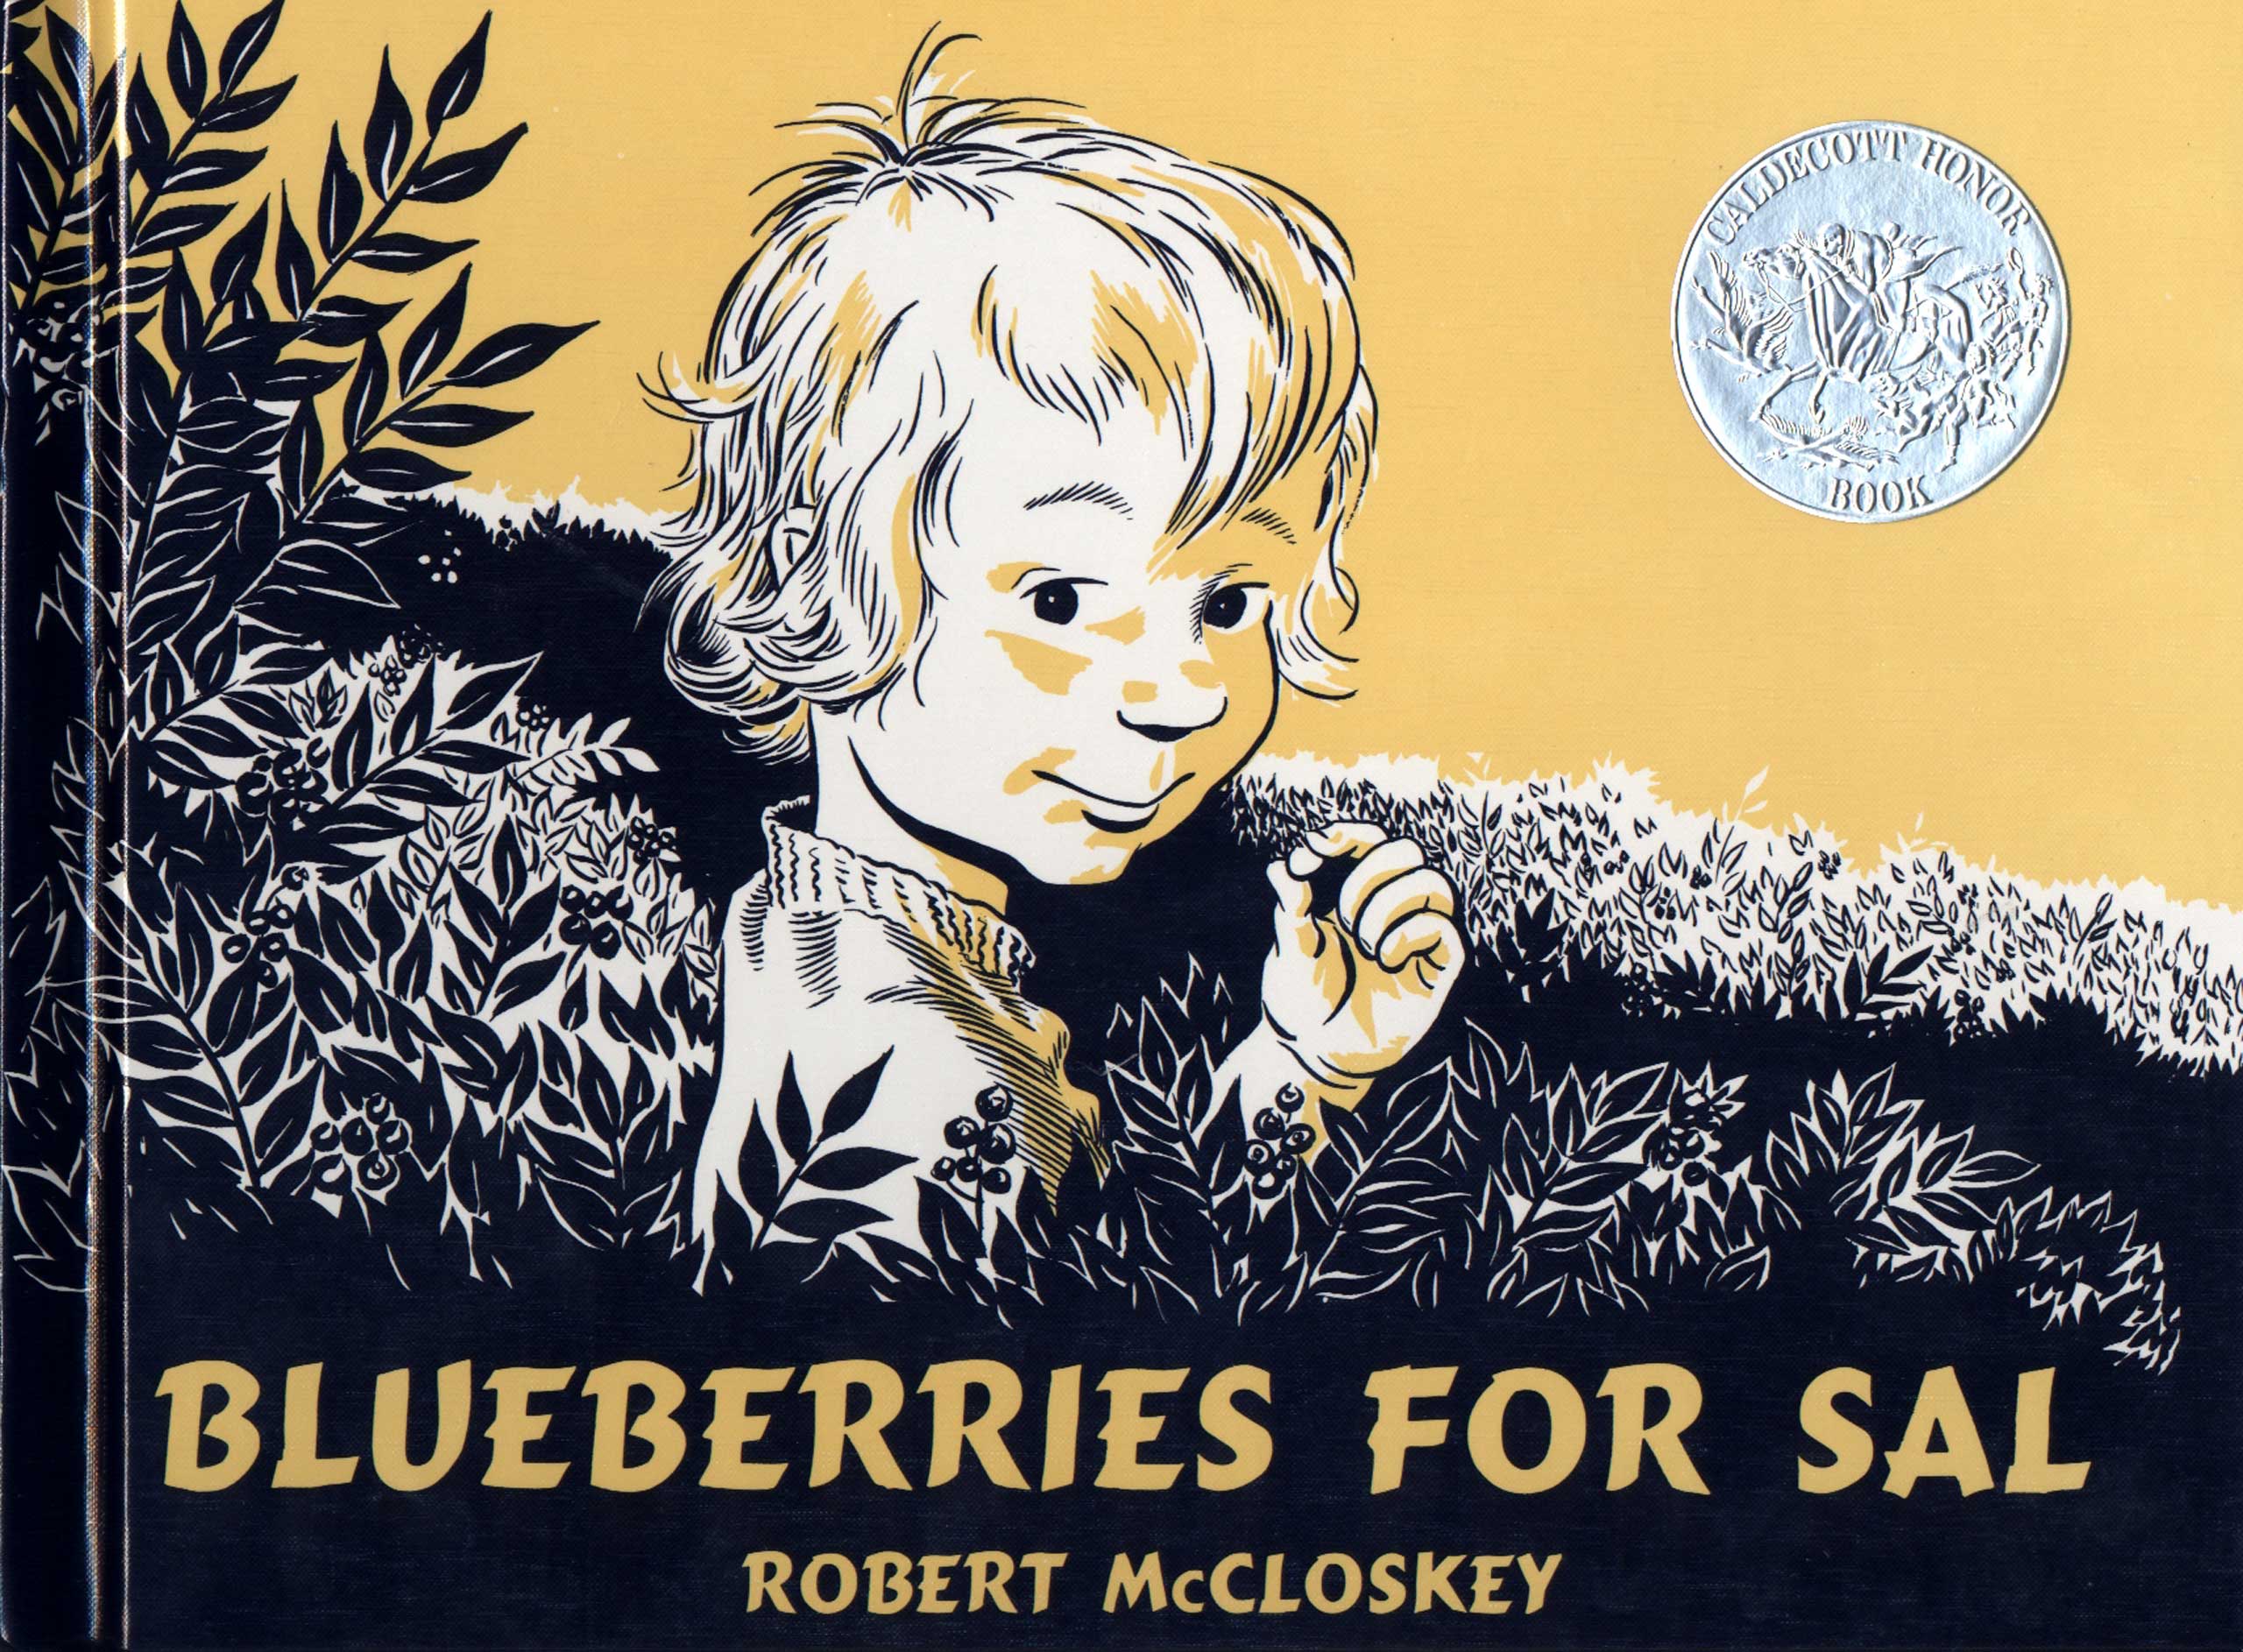 The 100 Best Children's Books of All Time